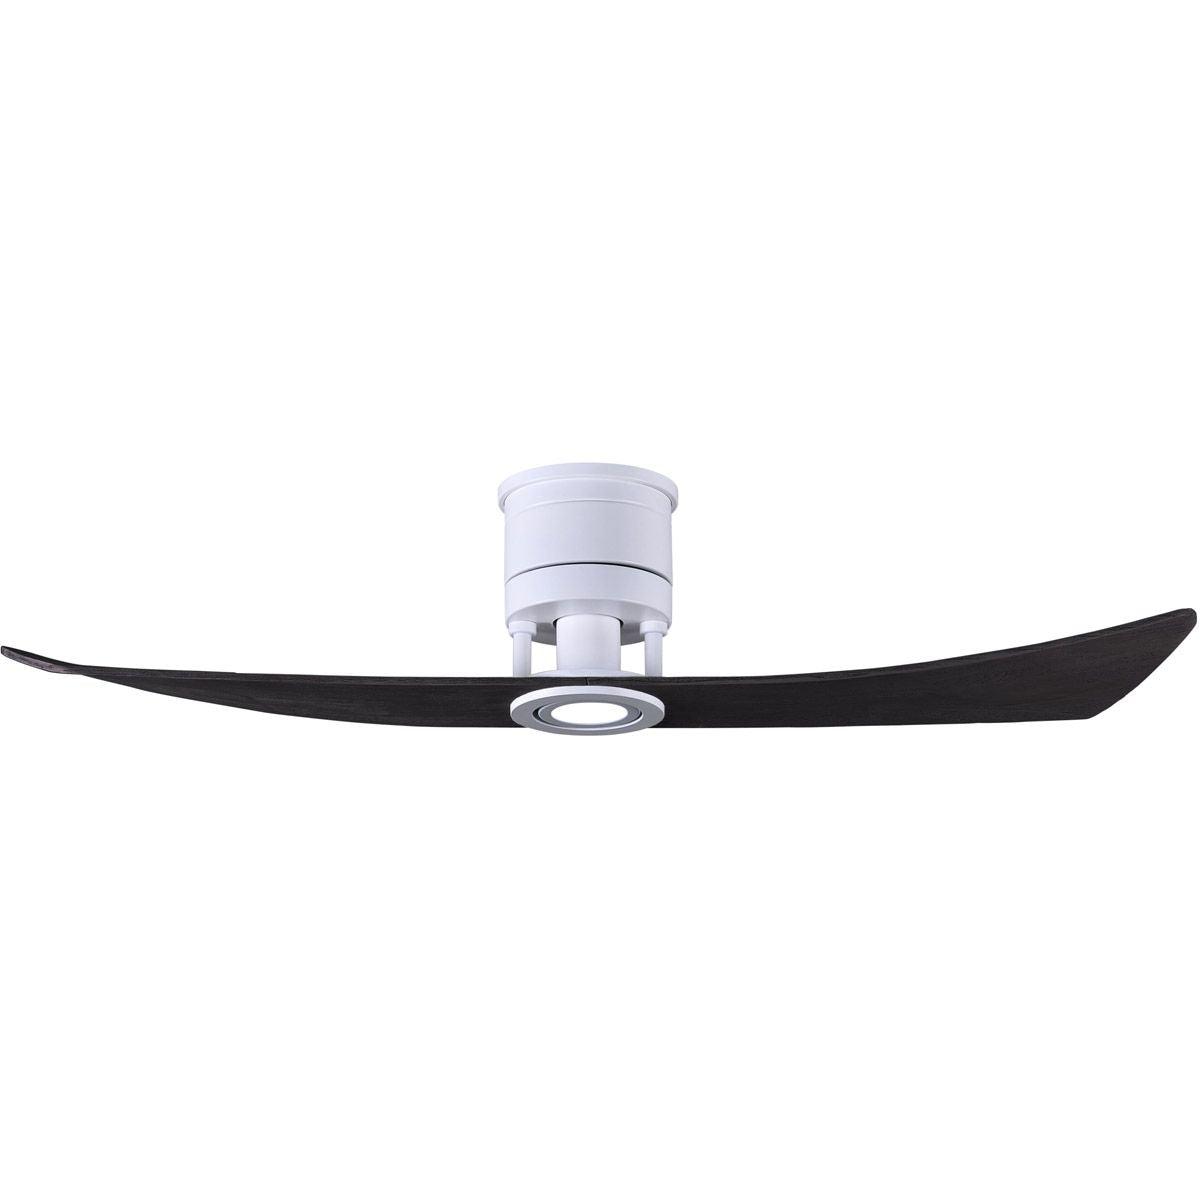 Lindsay 52 Inch Modern Outdoor Ceiling Fan With Light, Wall And Remote Control Included